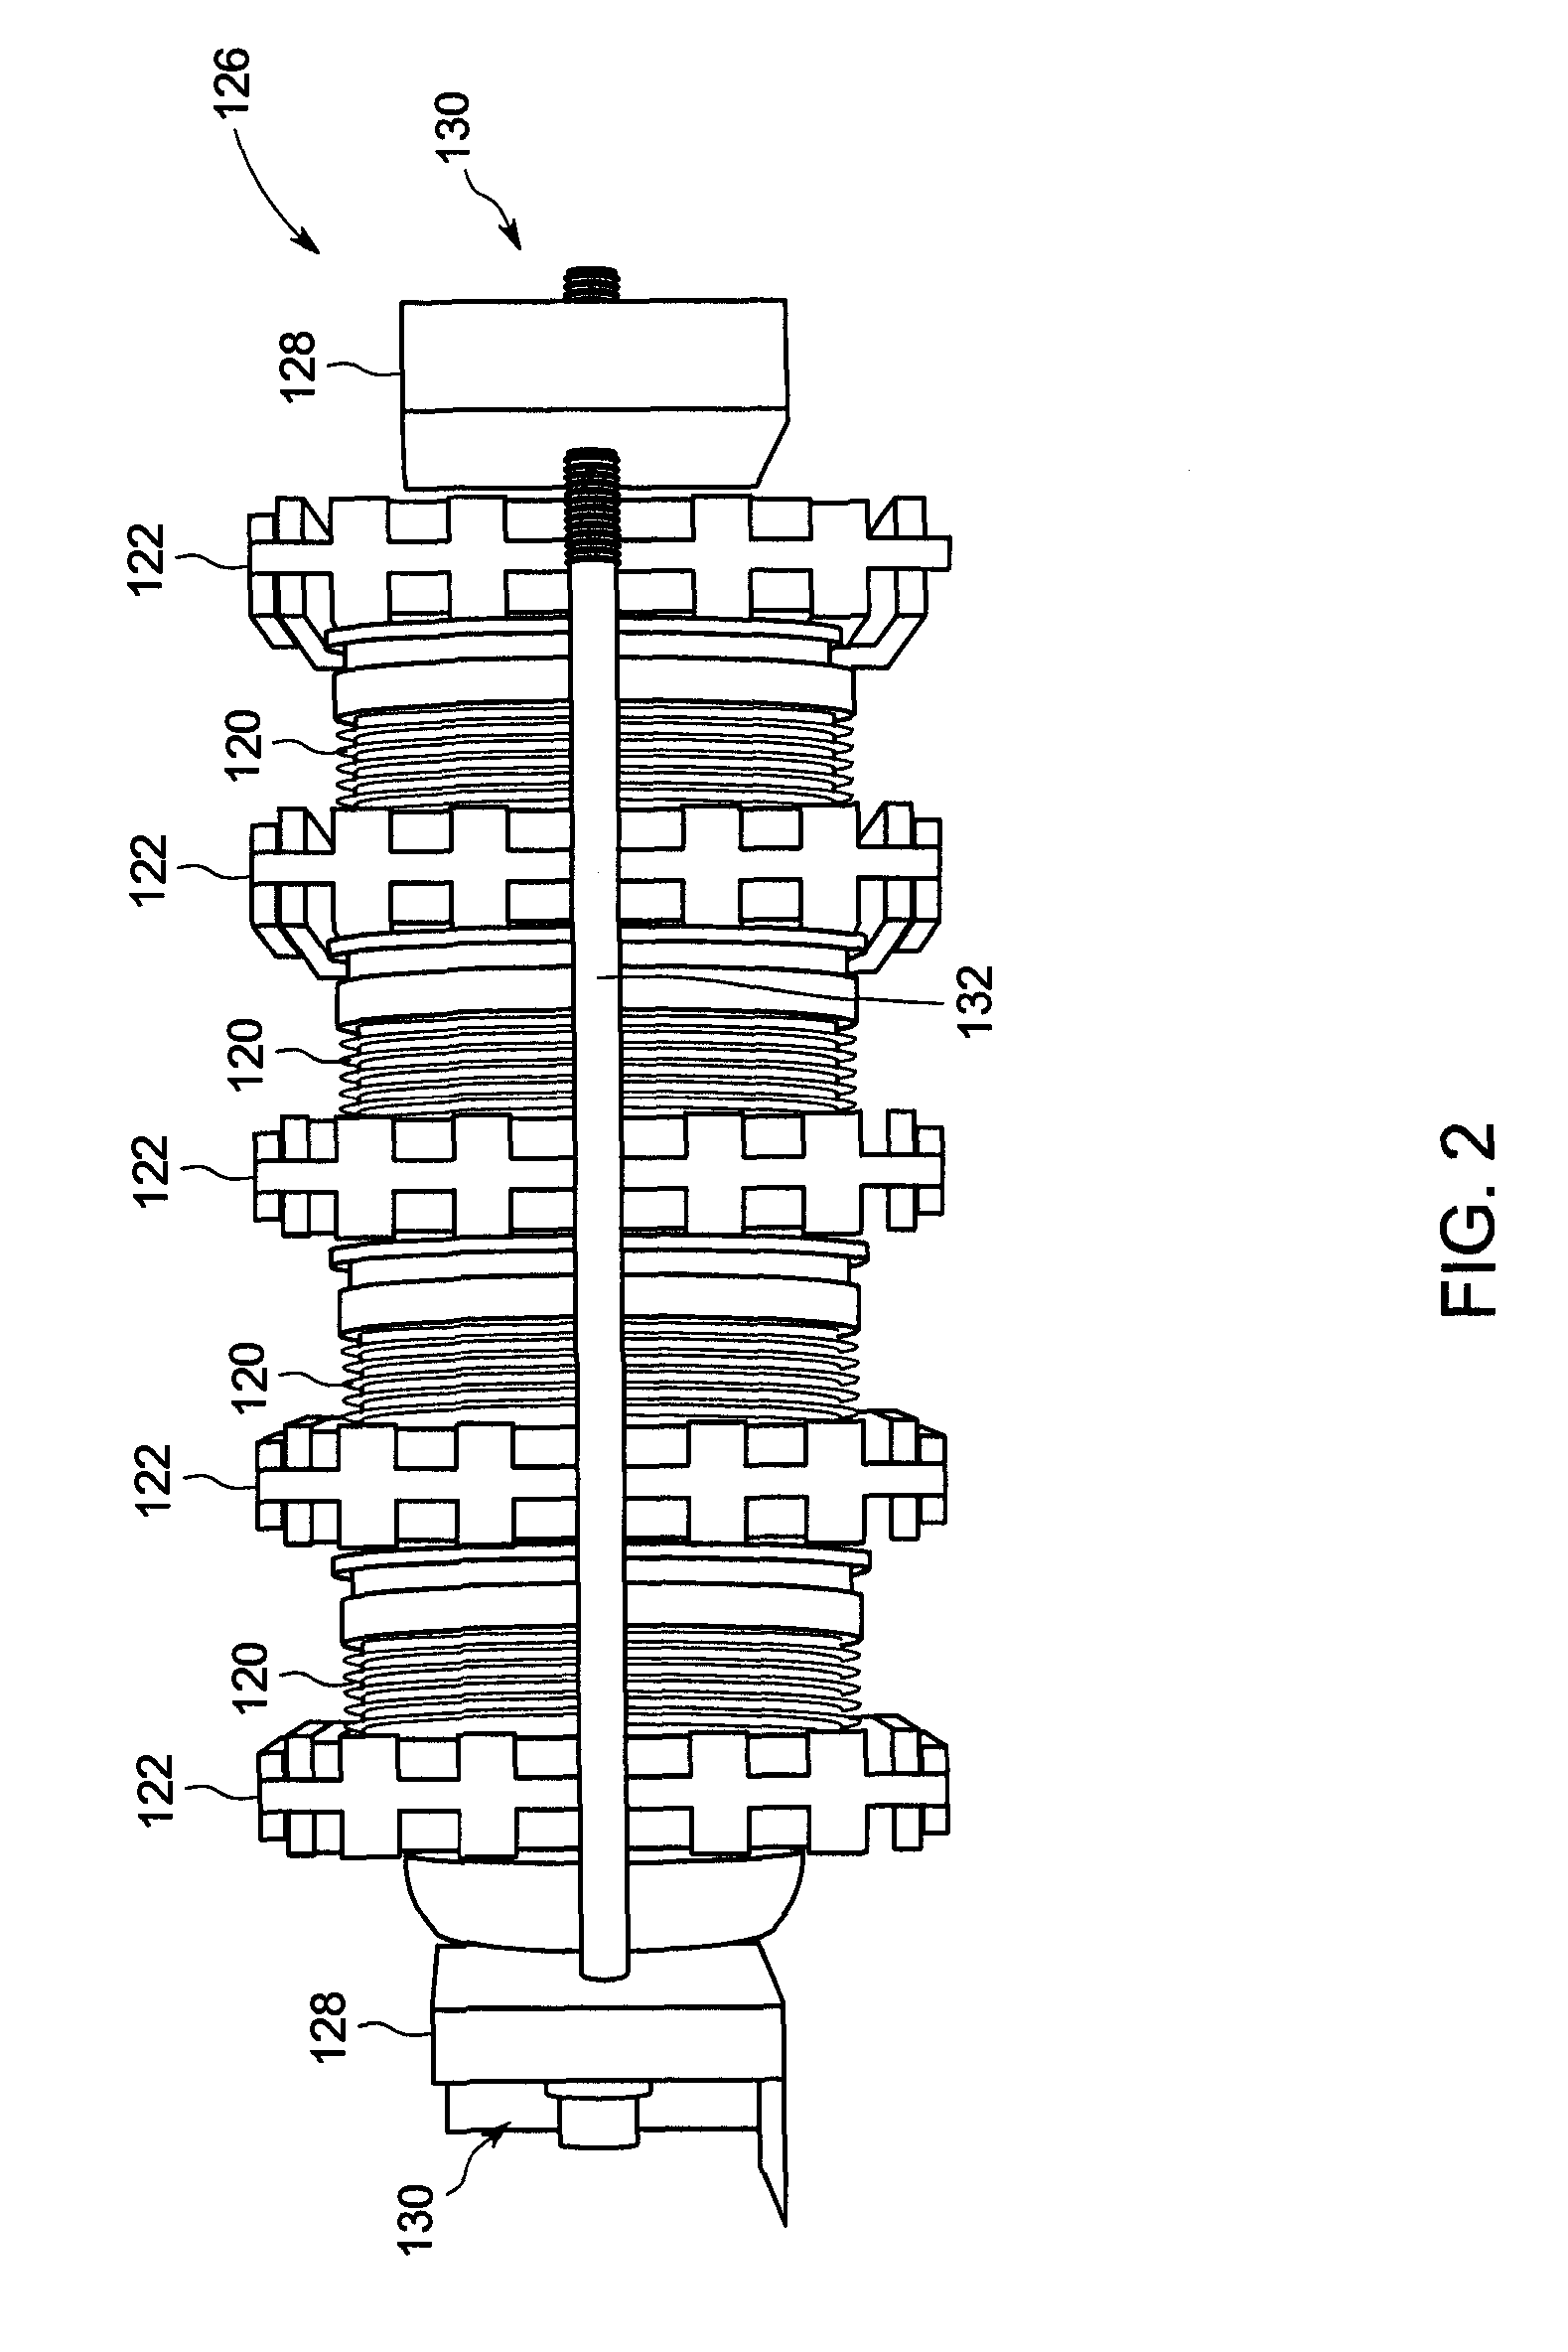 Method and system for an immersion boiling heat sink